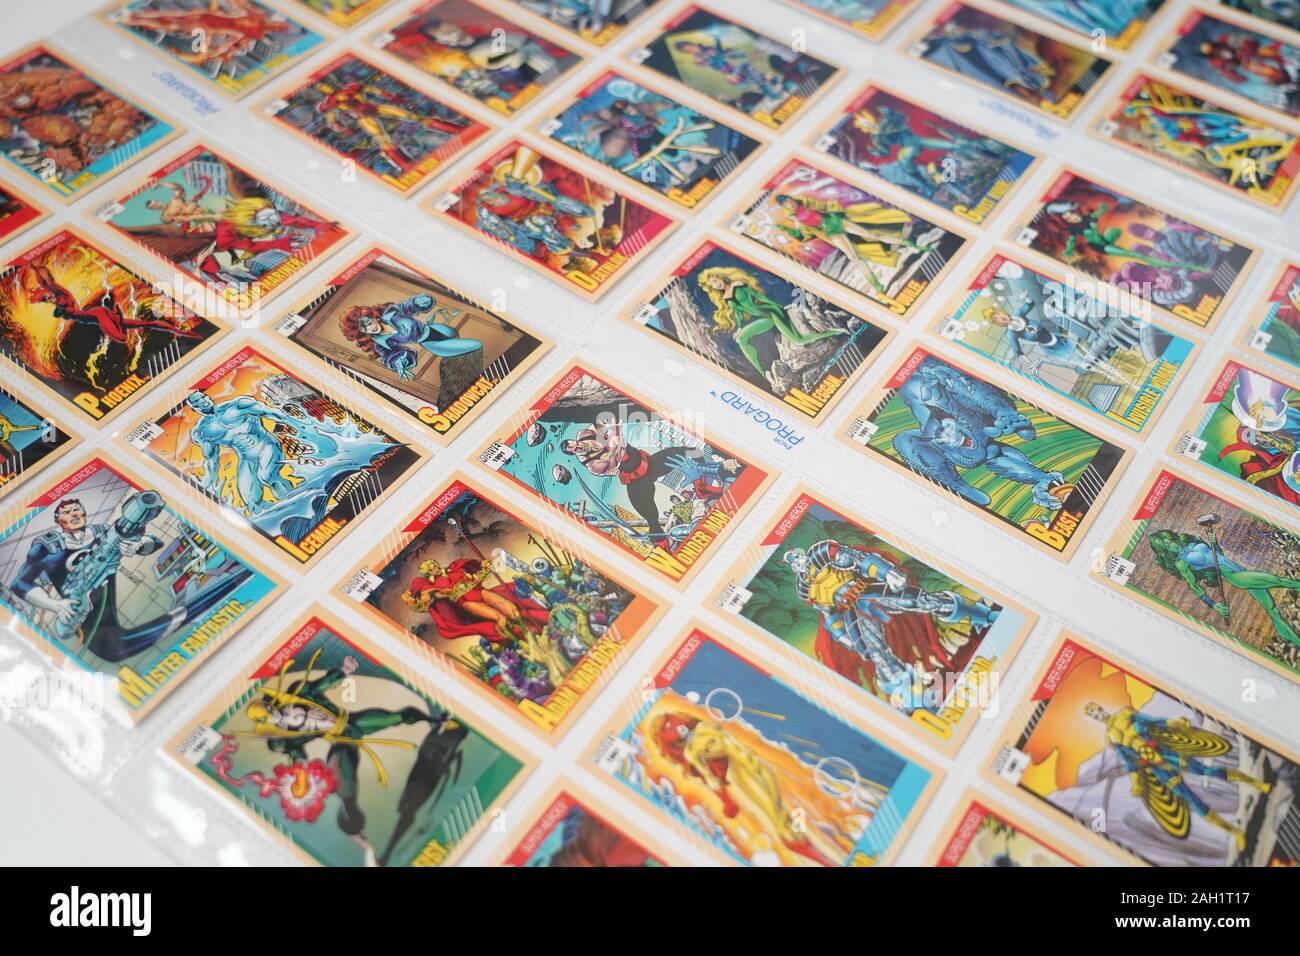 Superhero Cards High Resolution Stock Photography and Images - Alamy In Superhero Trading Card Template